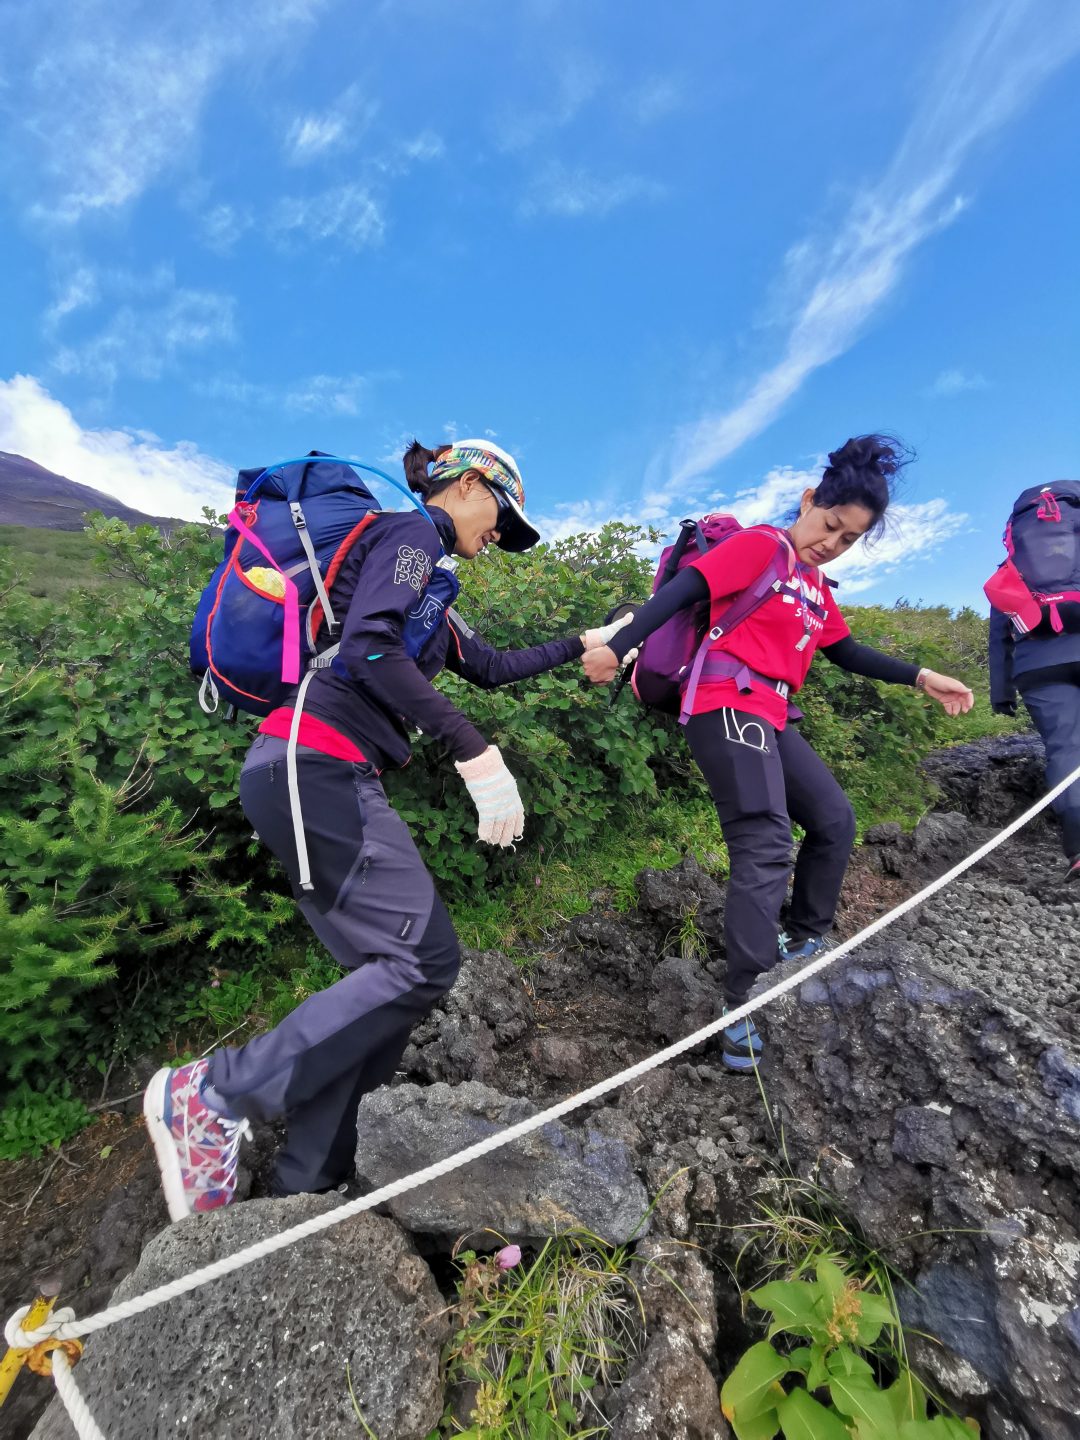 As Denise (right) and Chris (left) ascended Mount Fuji together, Denise described the terrain, trail and scenery.